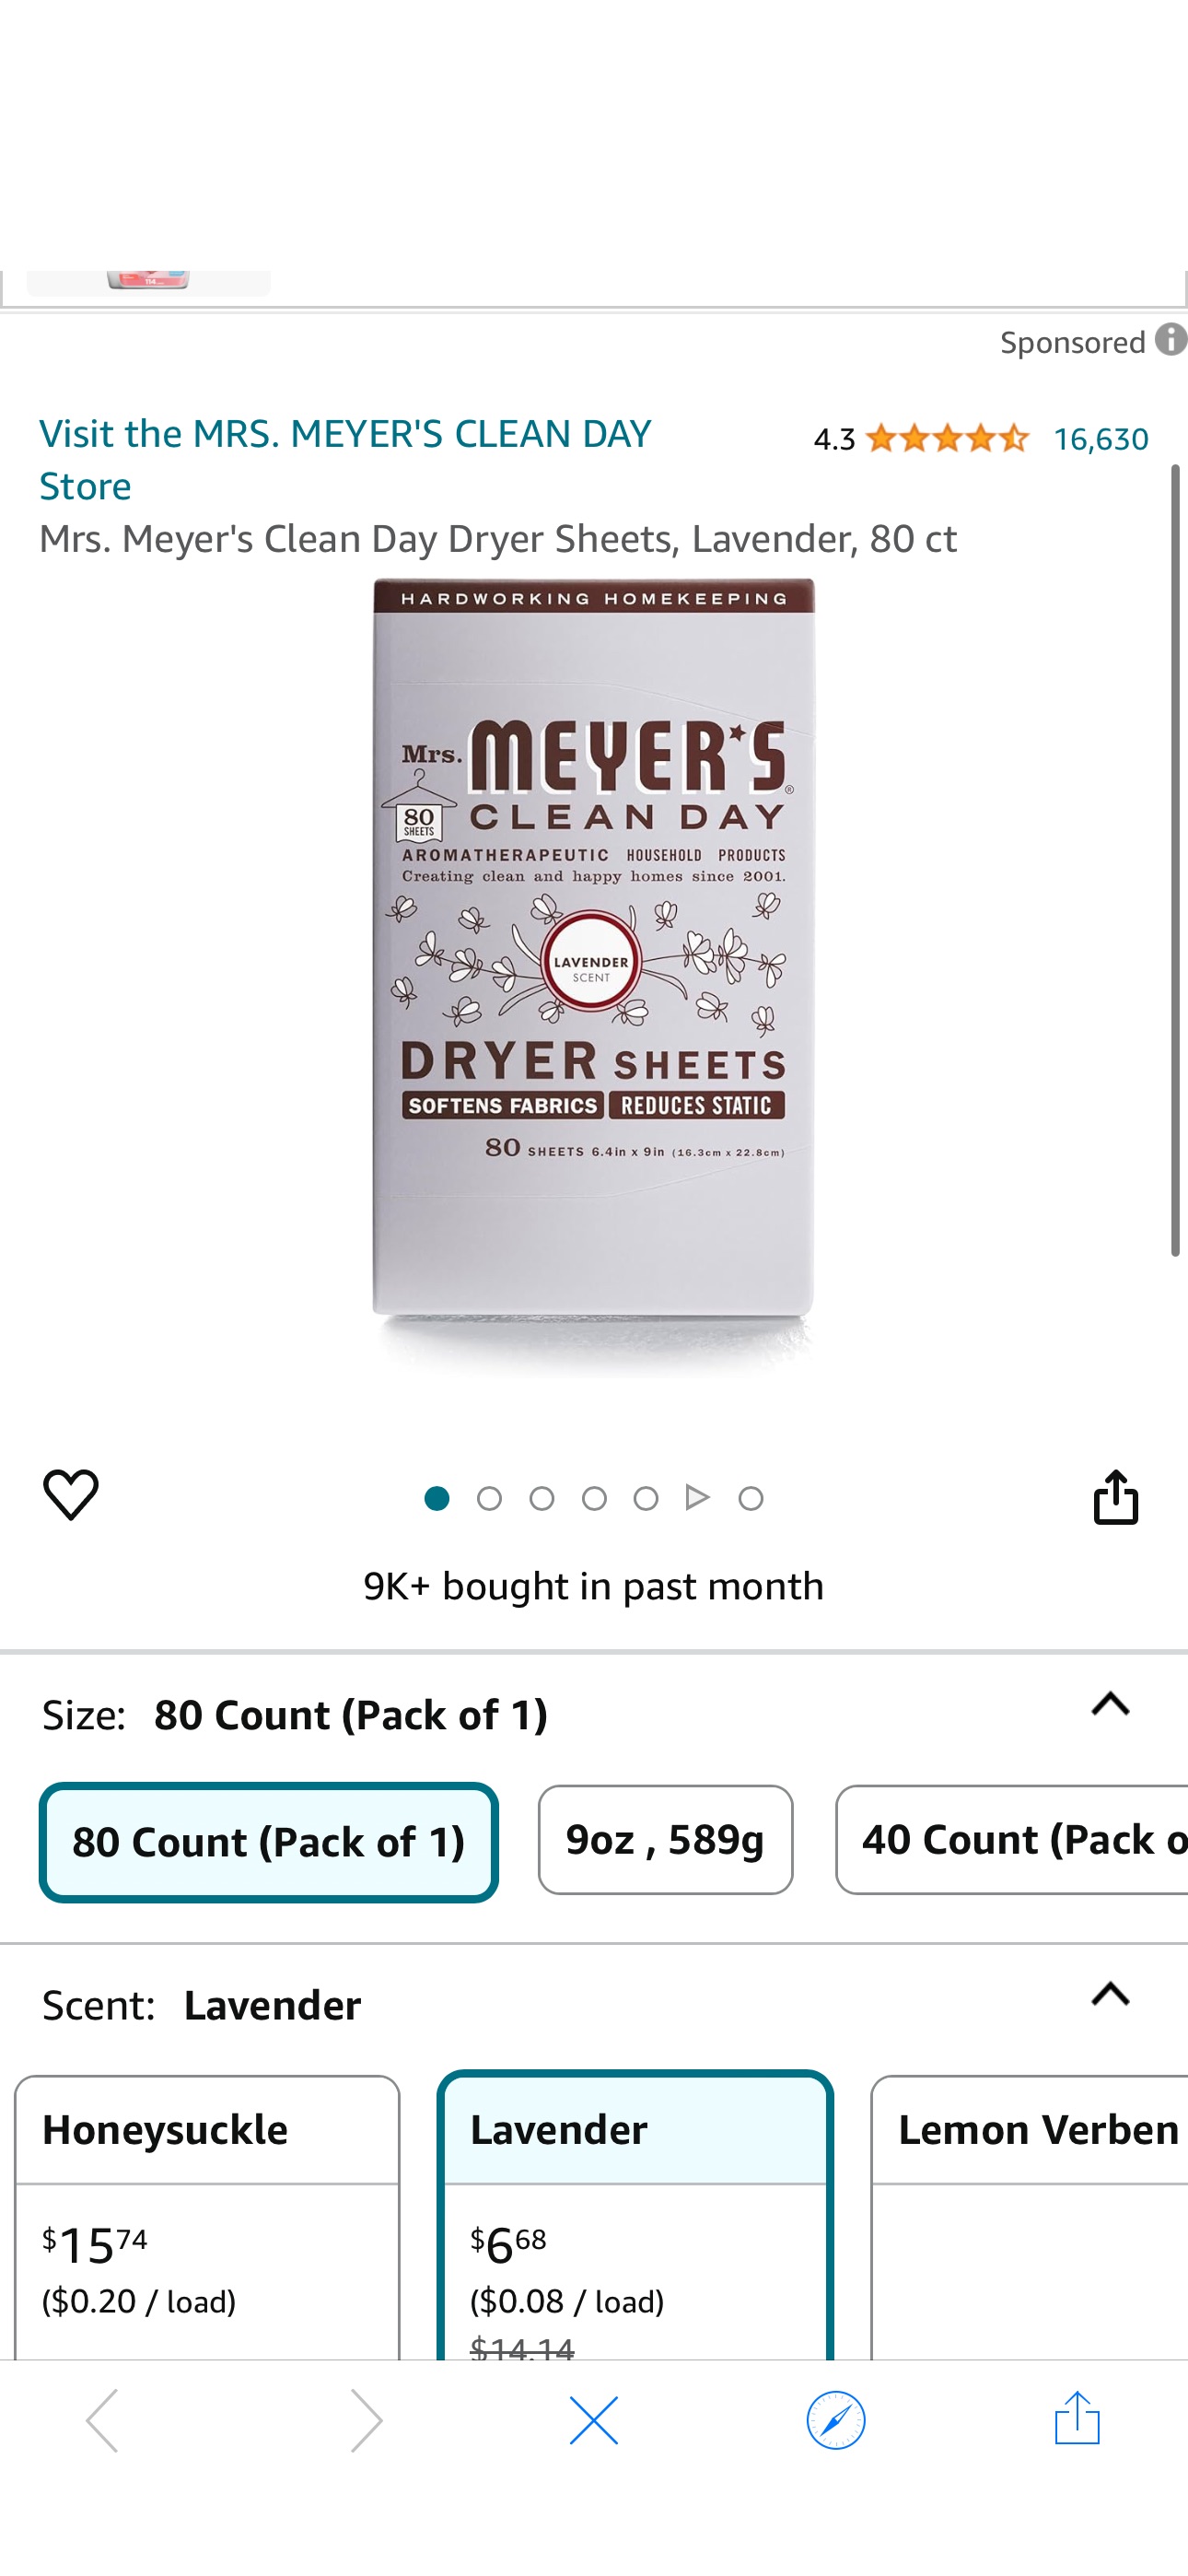 Amazon.com: Mrs. Meyer's Clean Day Dryer Sheets, Lavender, 80 ct : Health & Household